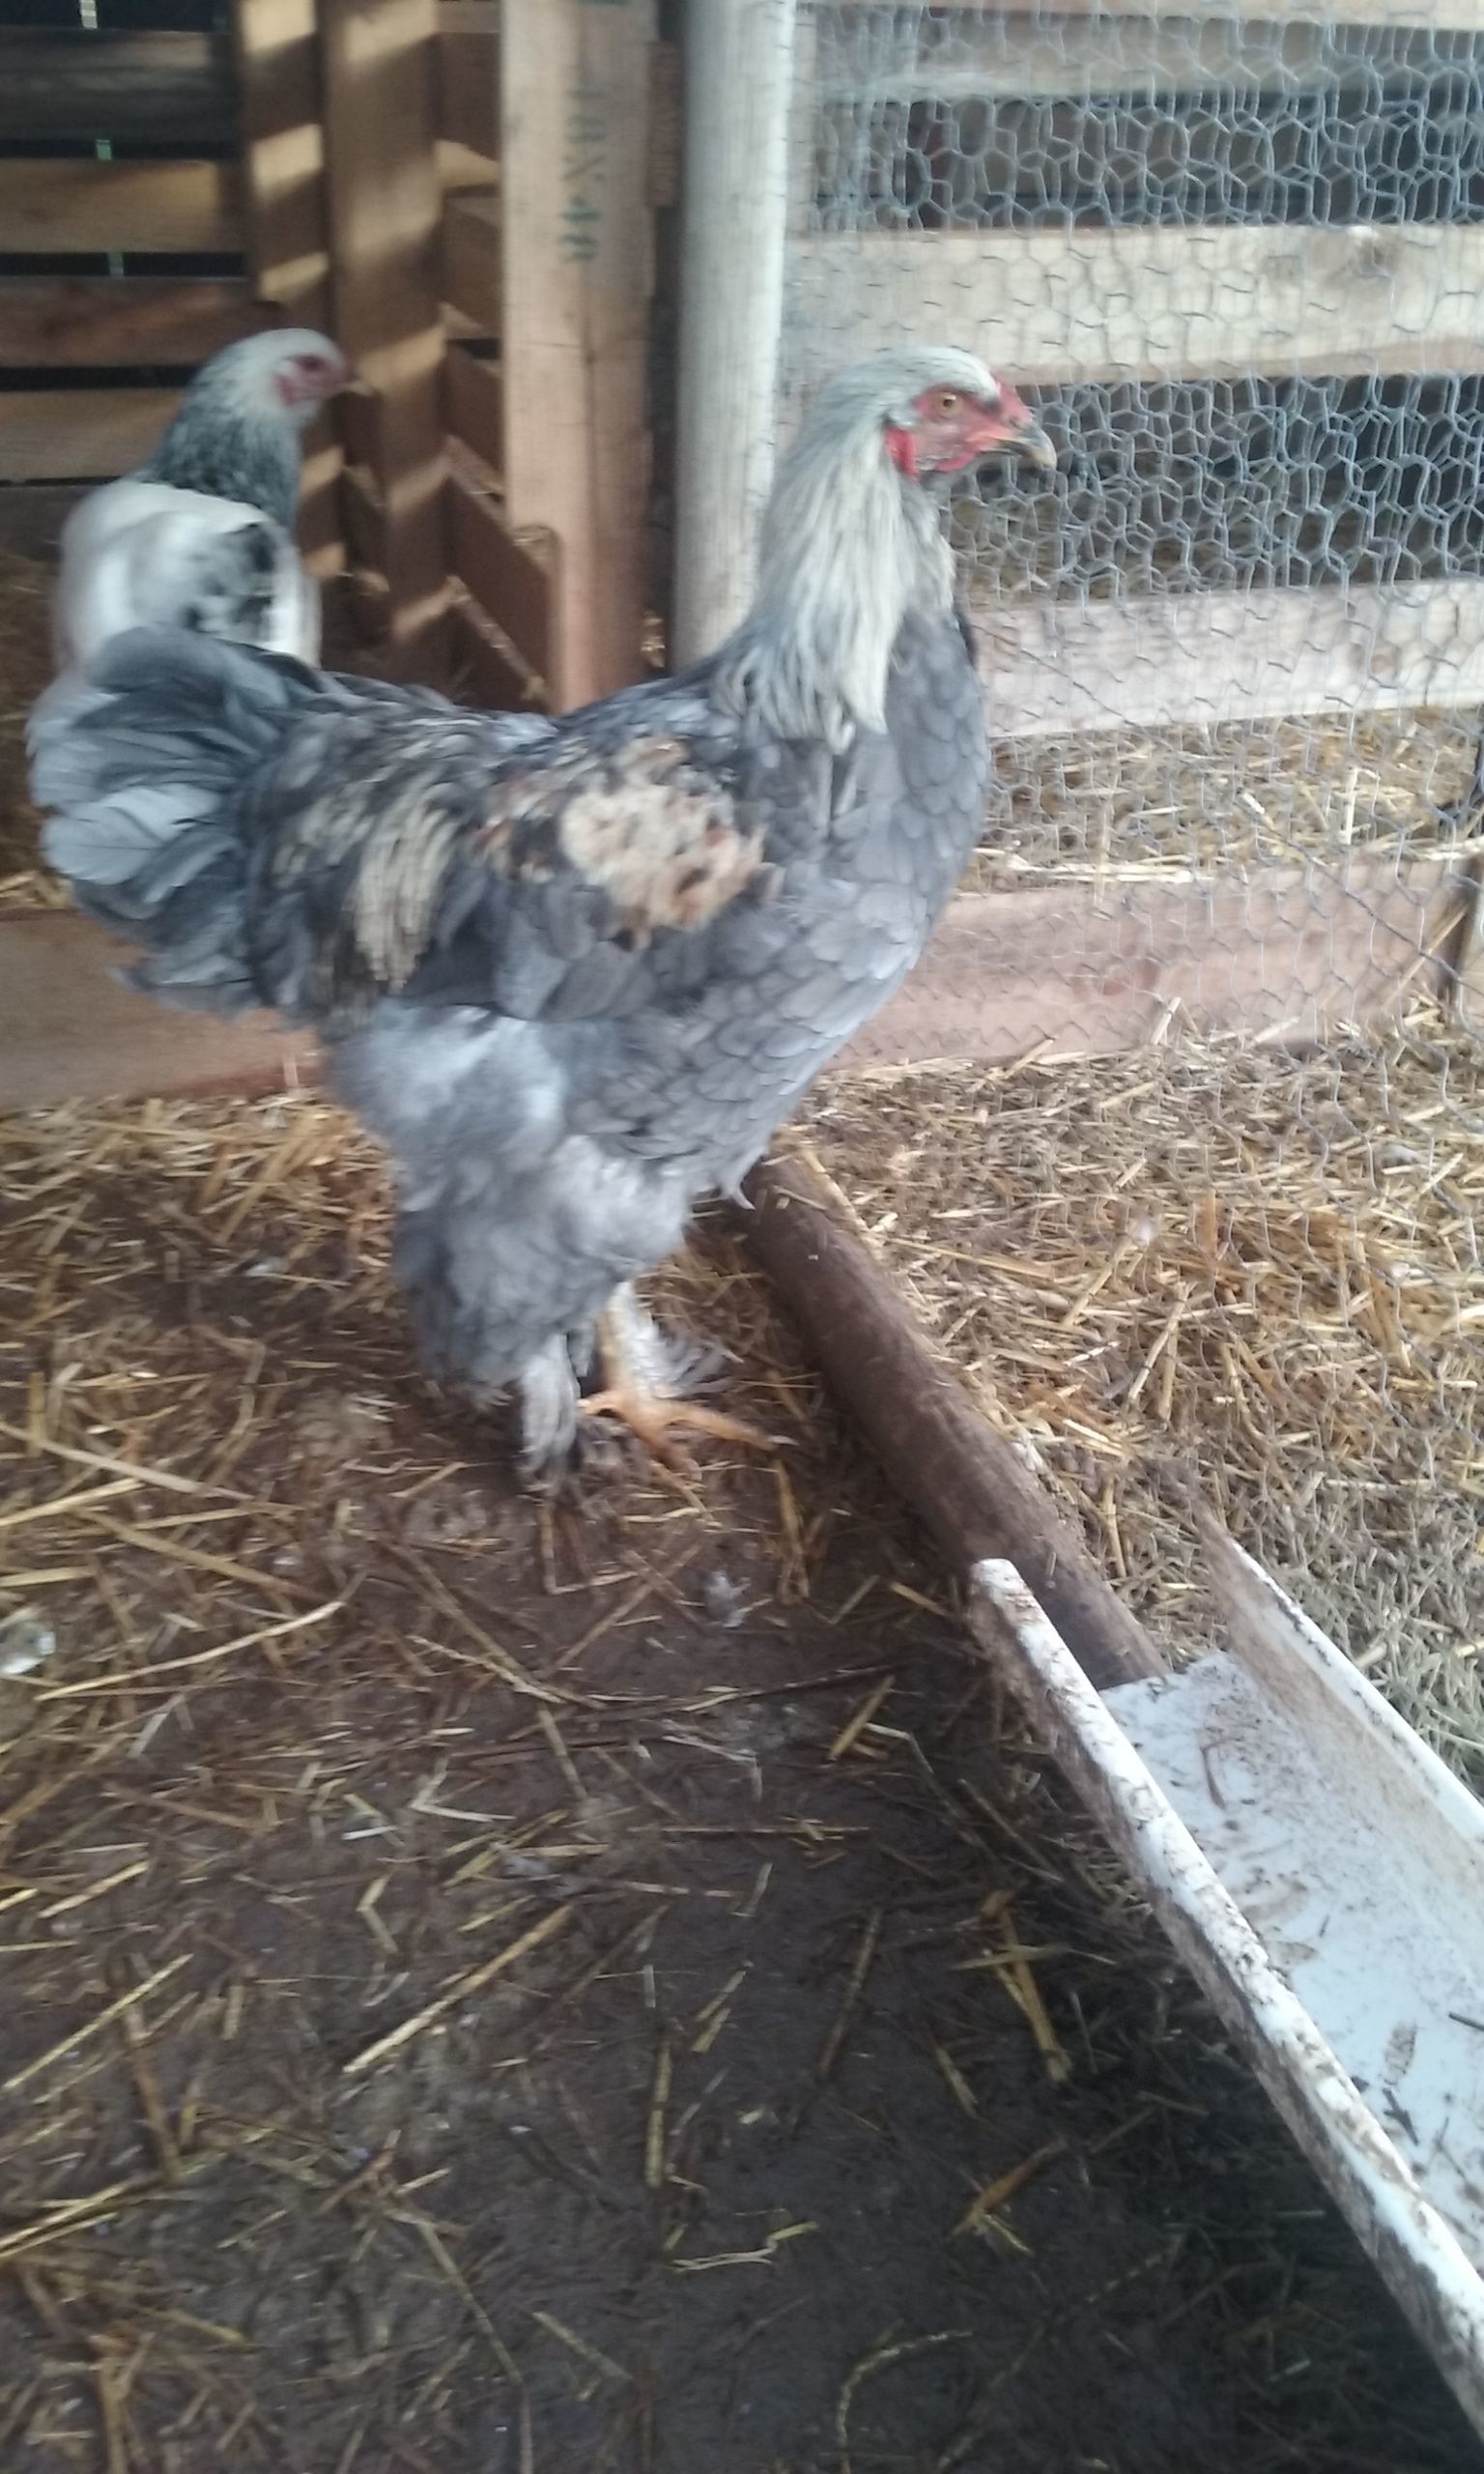 This is my Rooster, Teddy. 
He's my (BBS) Blue Berkshire Brahma.
He's absolutely stunning, the pictures don't do him justice. 
He's 6 months old and my father-in-law and mother-in-law own a light brahma rooster that's 9 months old and he's just as big.